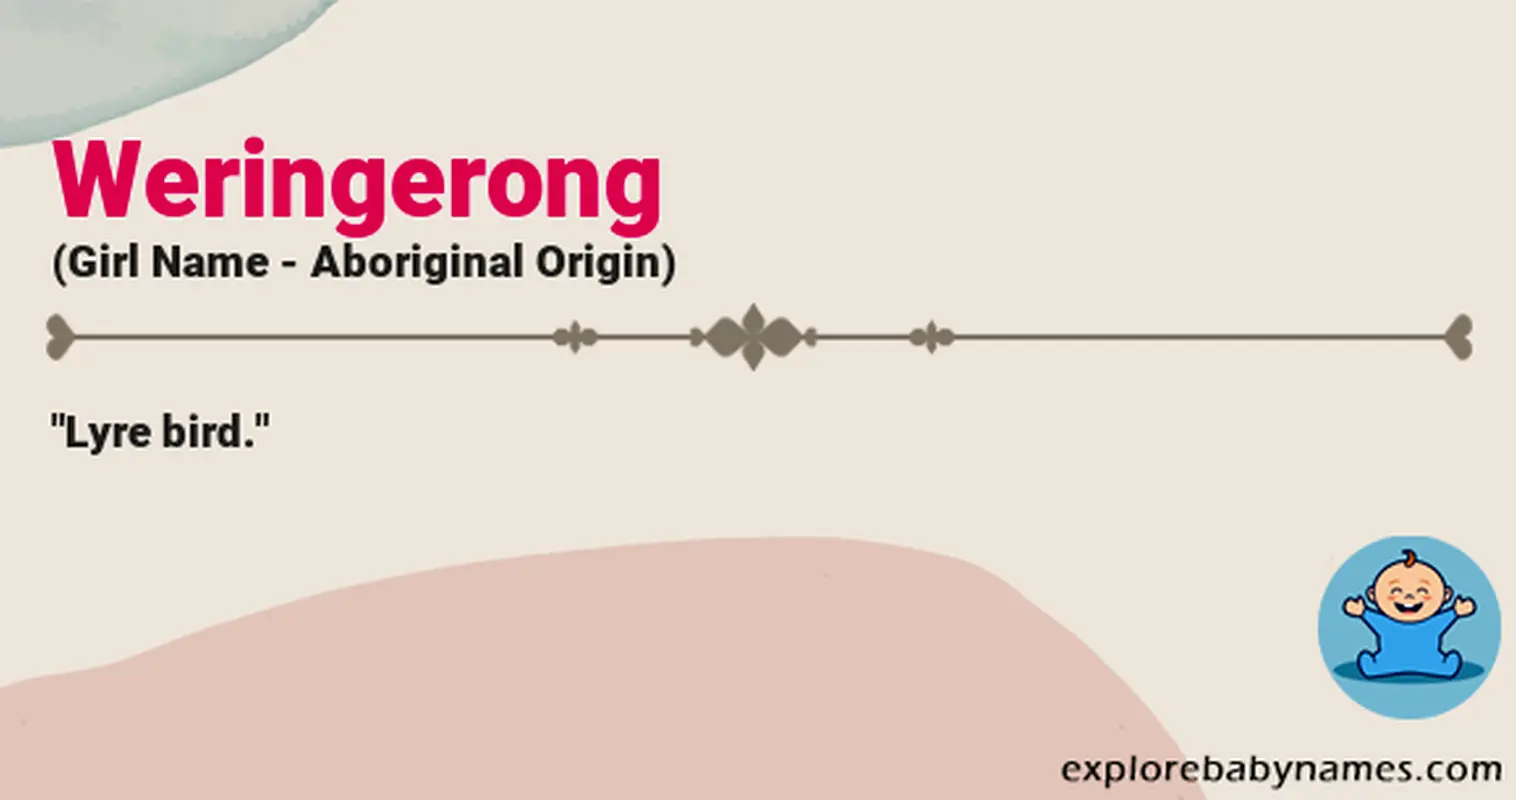 Meaning of Weringerong